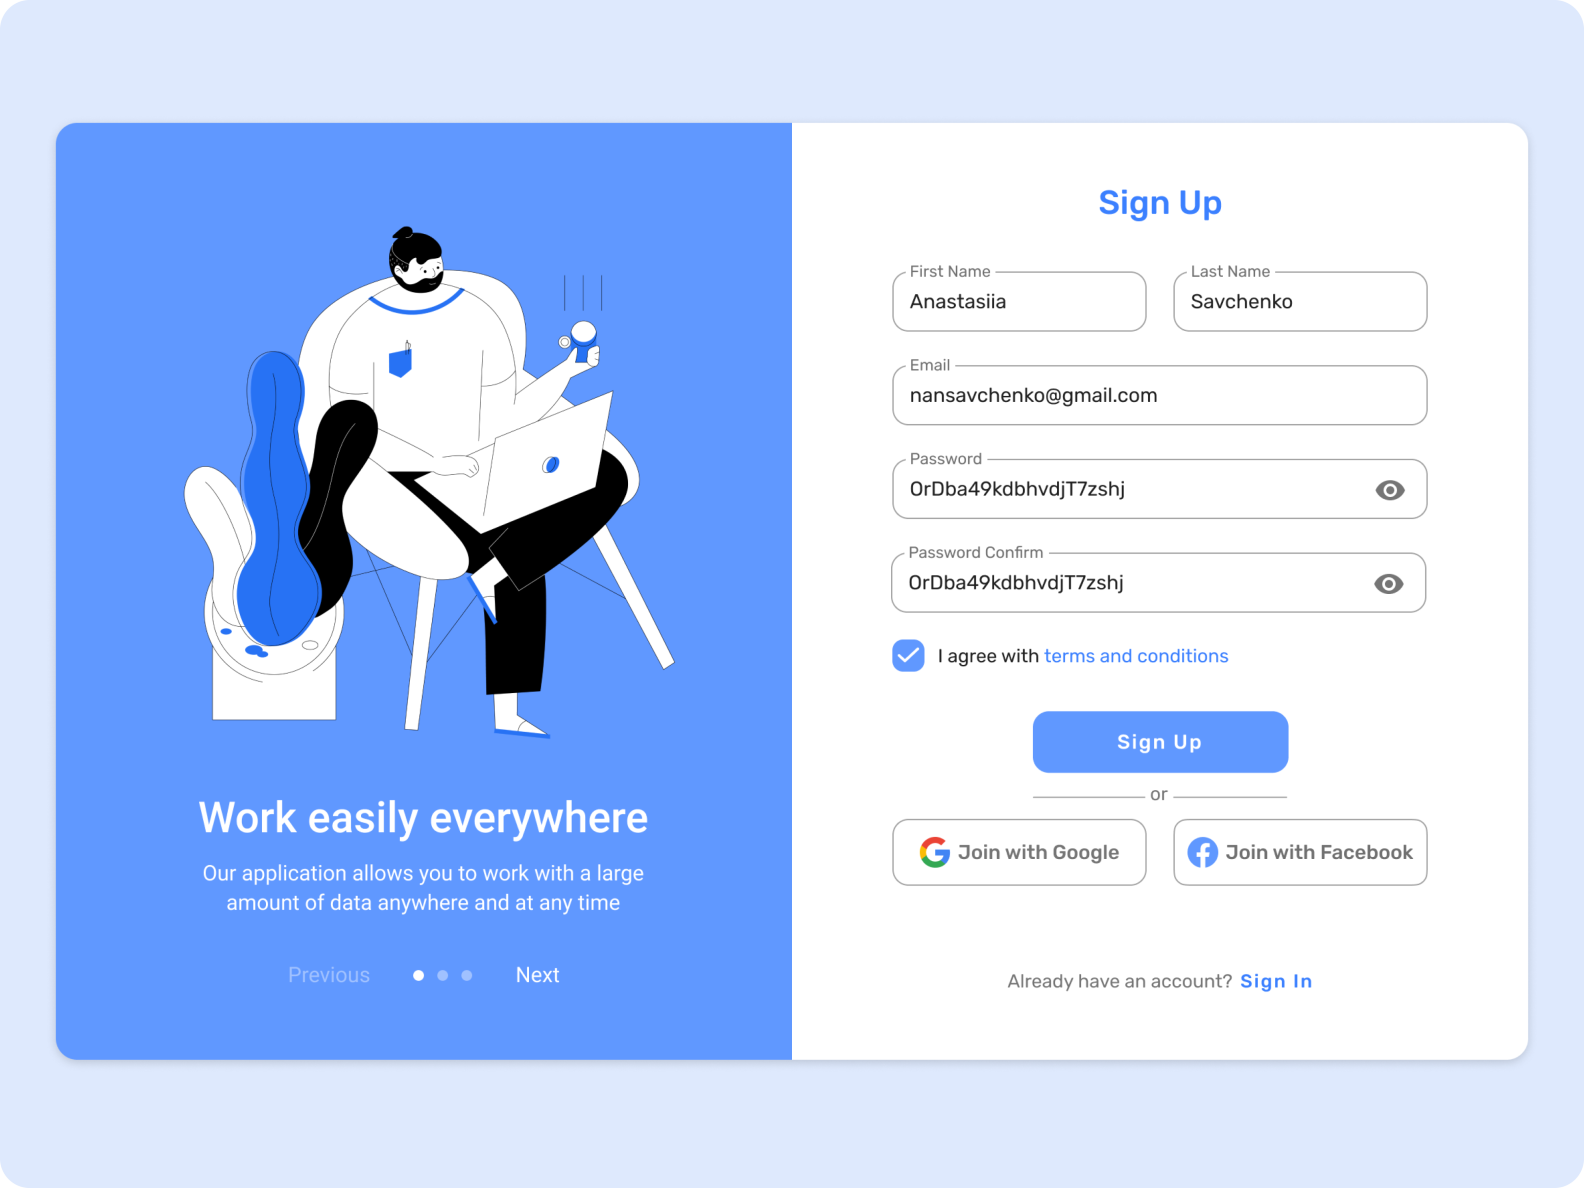 sign-up-form-for-web-app-by-anastasiia-savchenko-on-dribbble